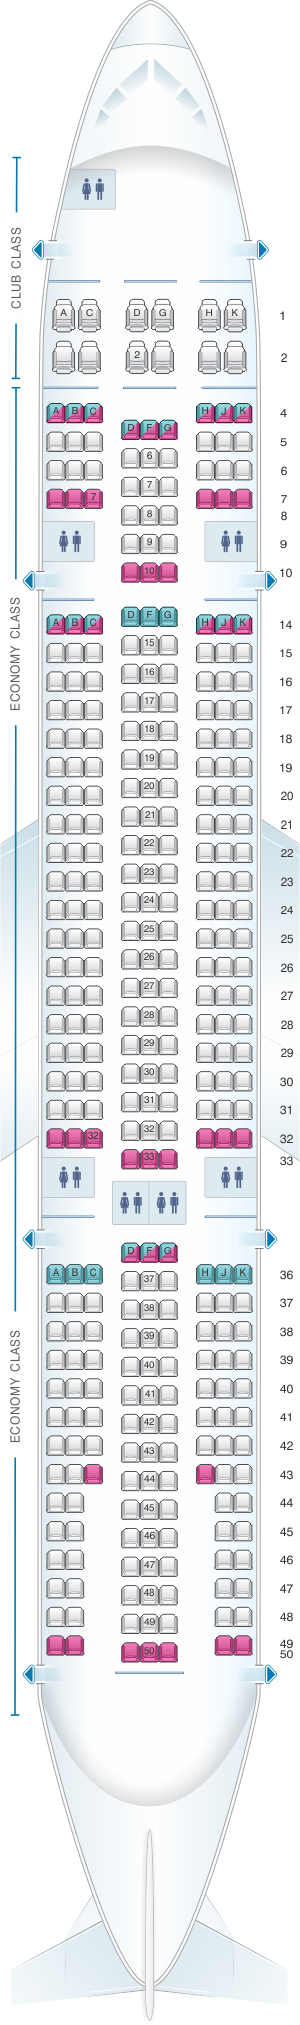 airbus a330 200 seating